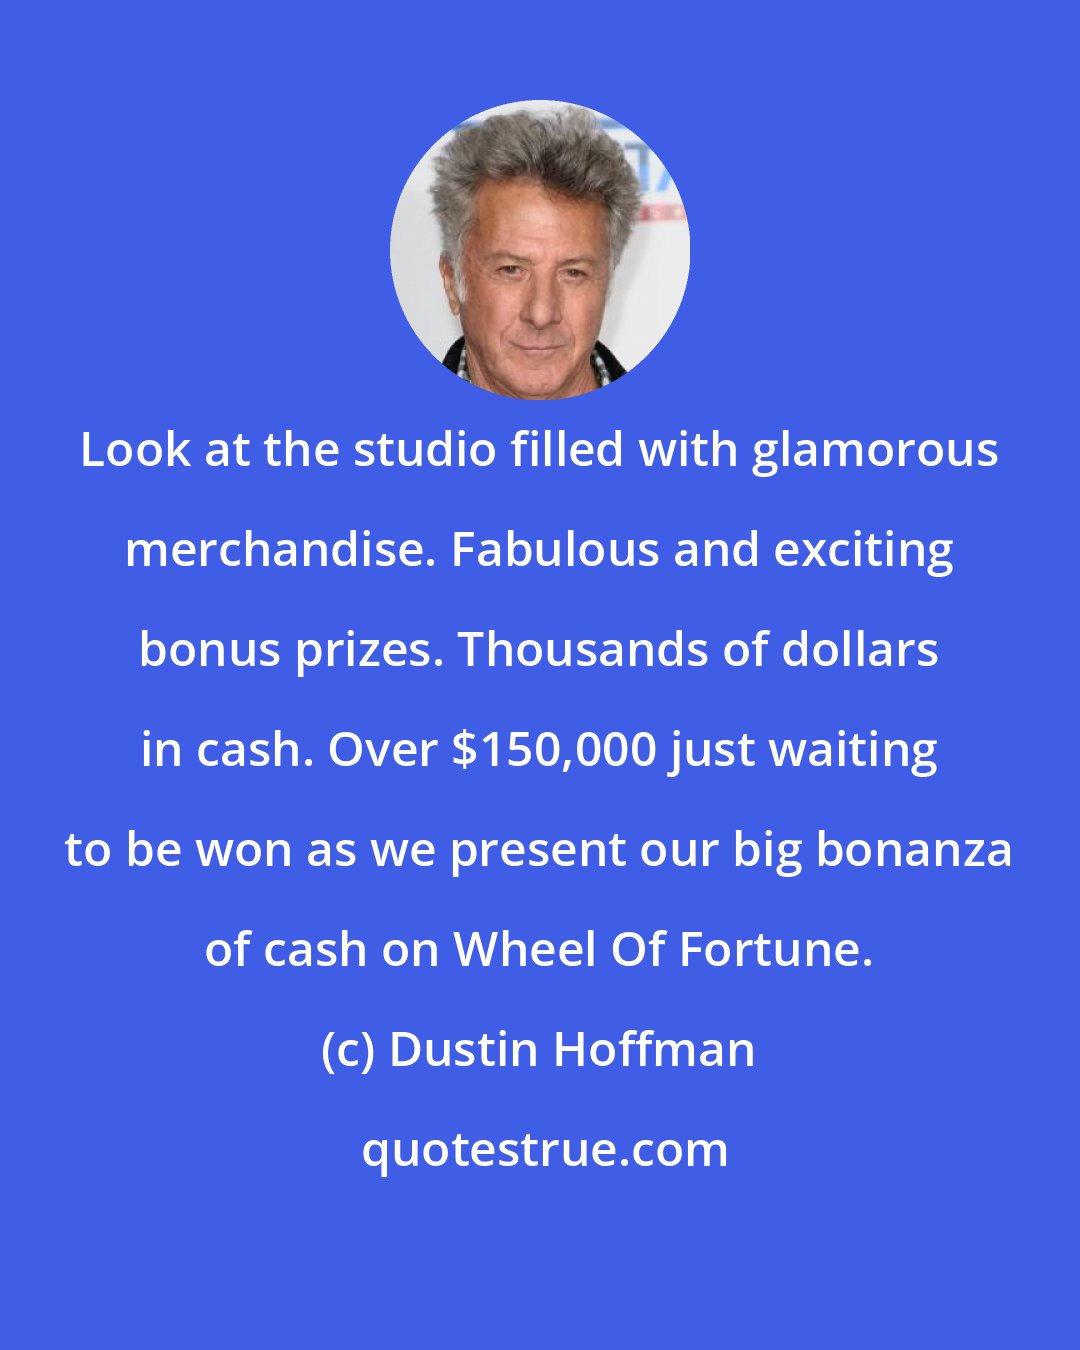 Dustin Hoffman: Look at the studio filled with glamorous merchandise. Fabulous and exciting bonus prizes. Thousands of dollars in cash. Over $150,000 just waiting to be won as we present our big bonanza of cash on Wheel Of Fortune.